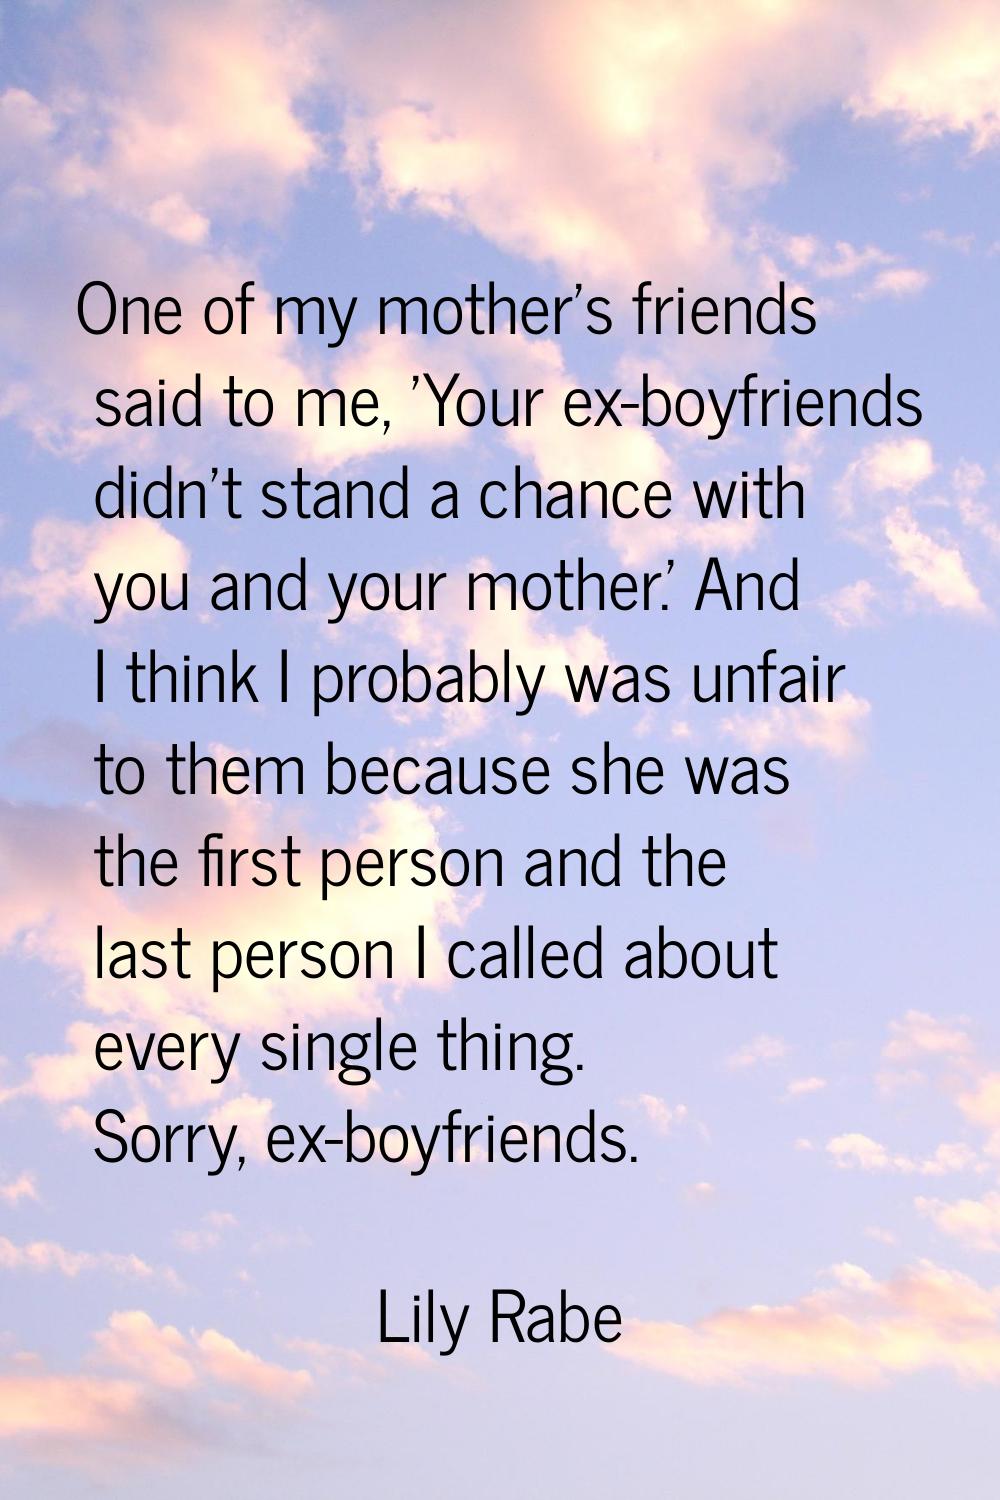 One of my mother's friends said to me, 'Your ex-boyfriends didn't stand a chance with you and your 